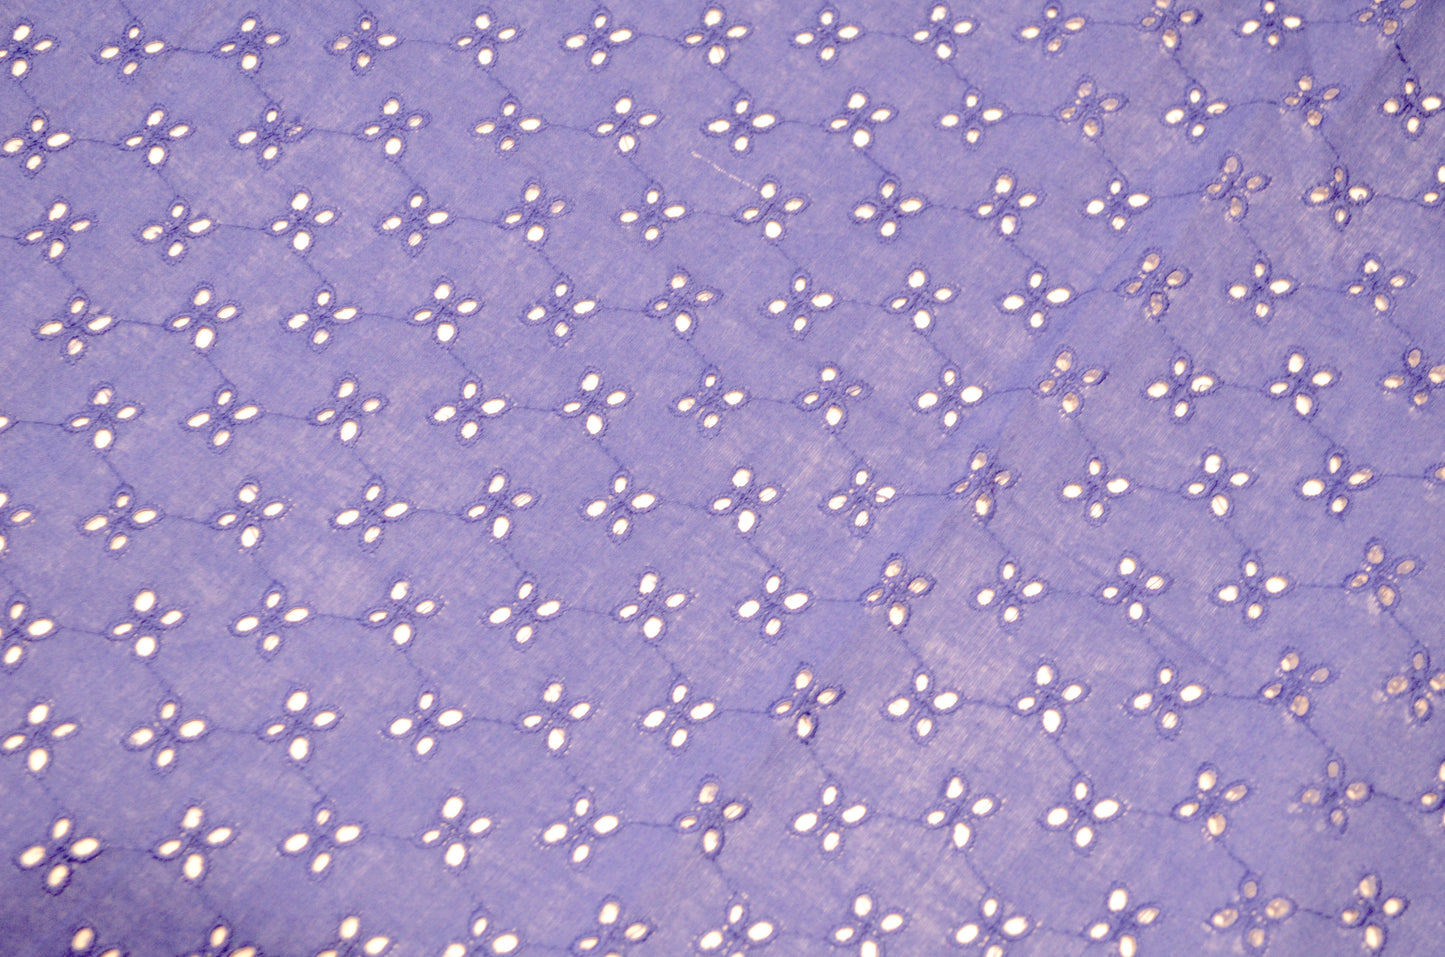 Lavender Broderie Anglaise (Embroidered Cotton)  Nursing cover / Breastfeeding cover